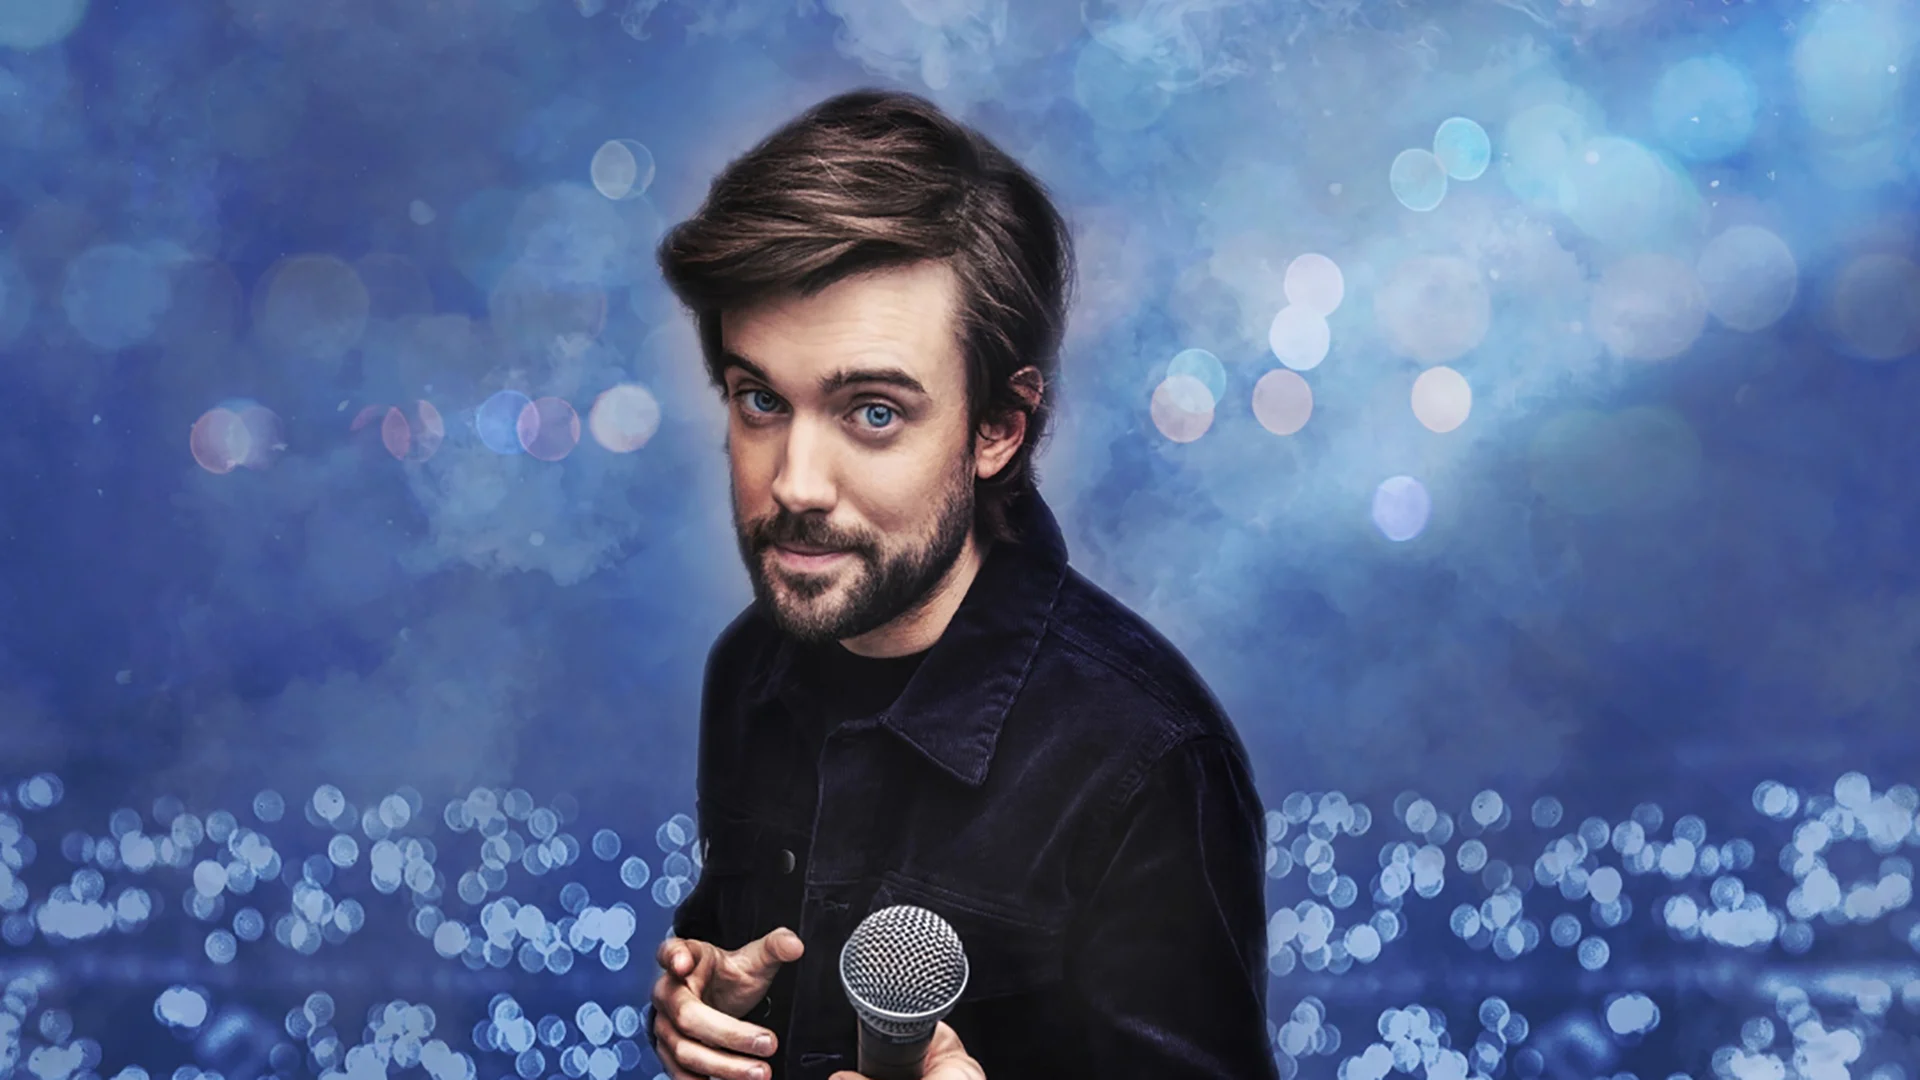 Jack Whitehall's Settle Down tour comes to Manchester AO Arena this week